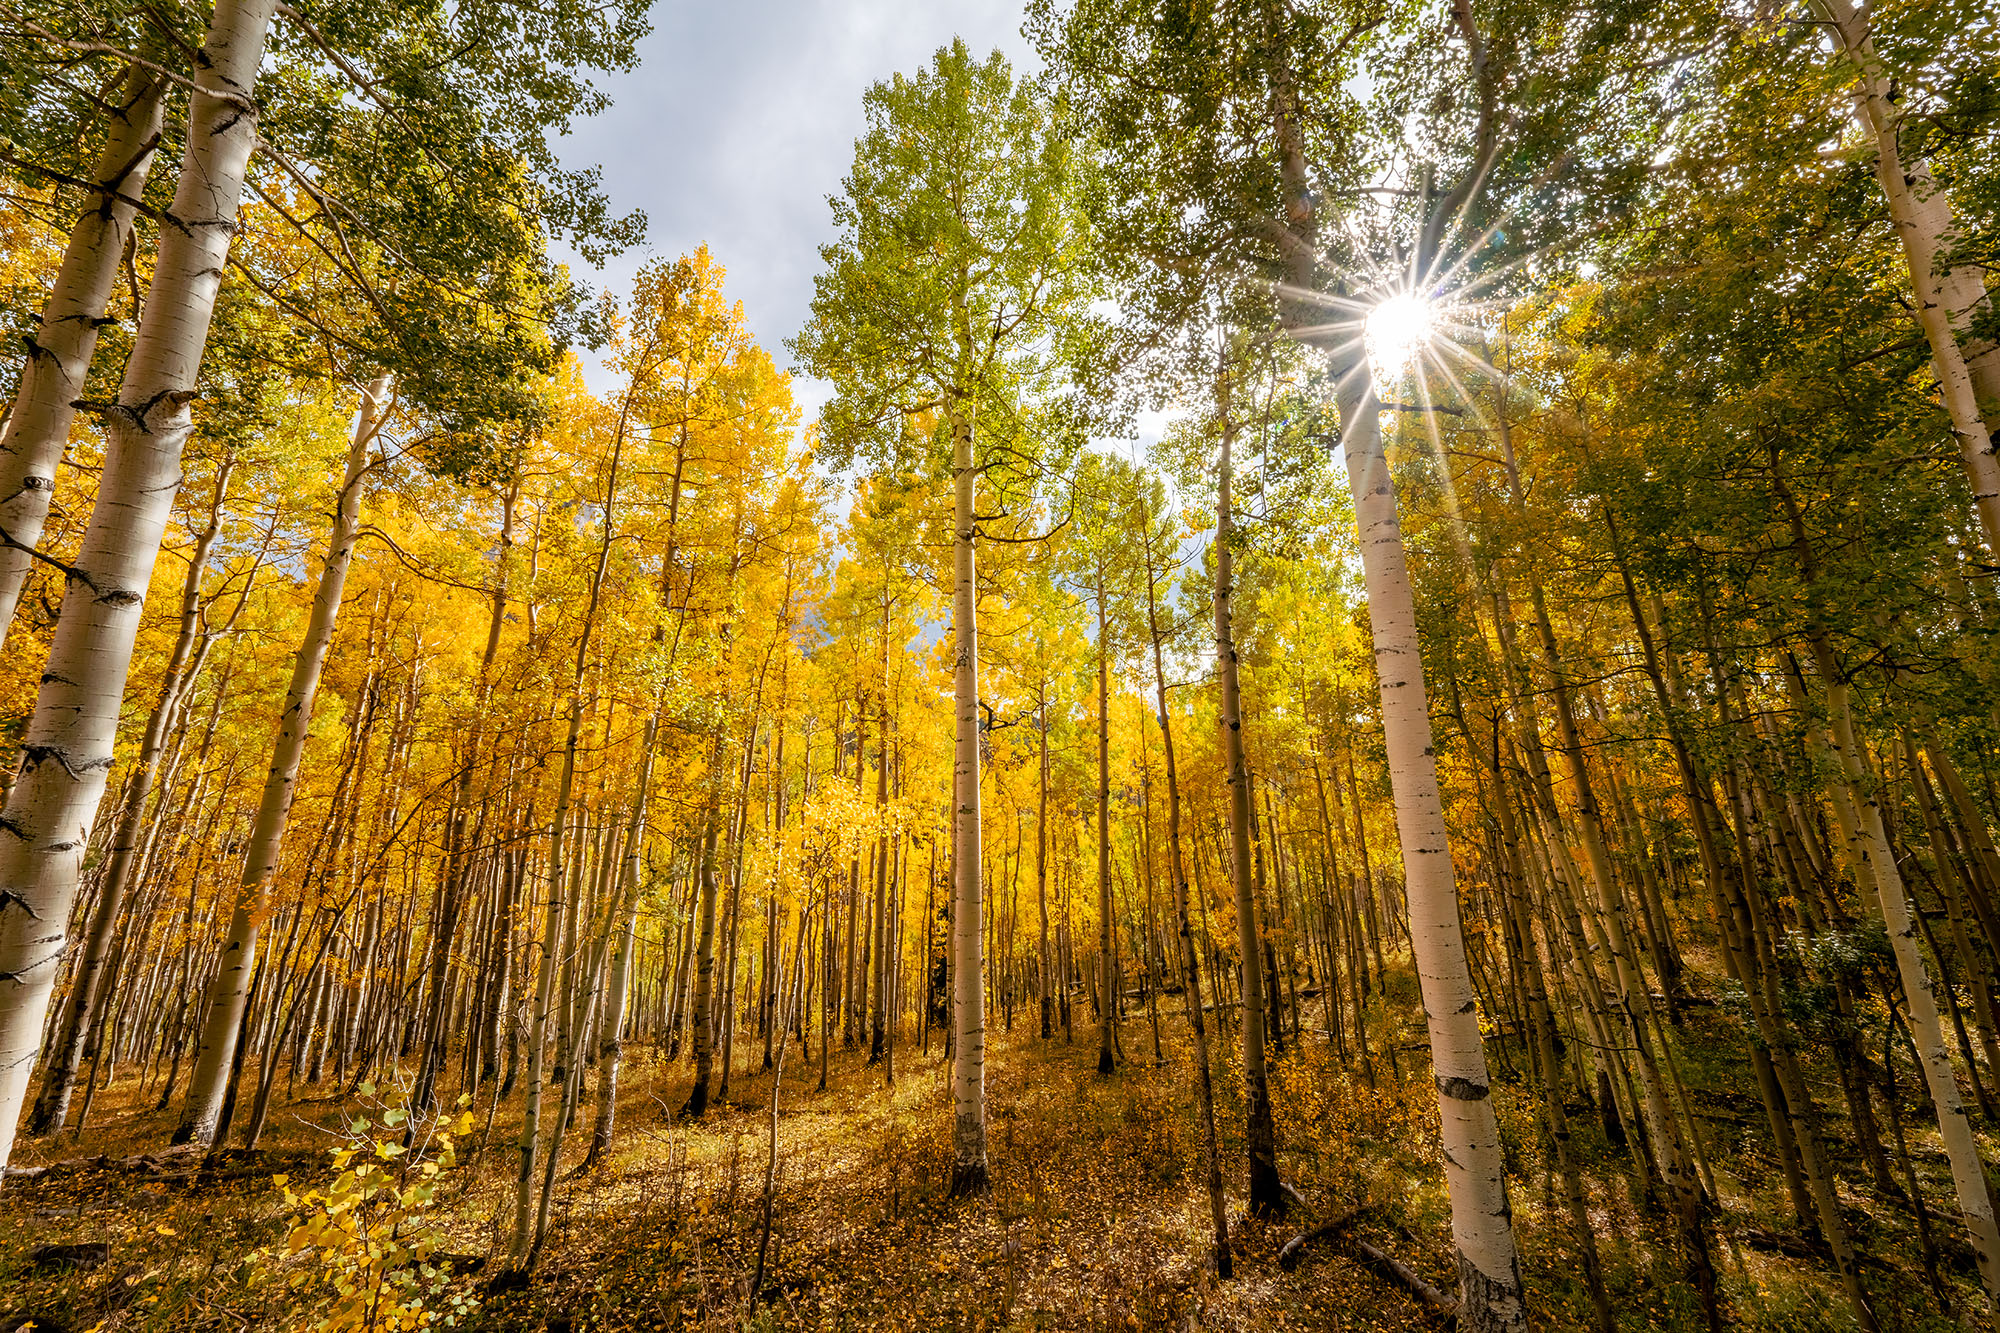 Nestled within the San Juan Mountains of Colorado, I found myself surrounded by a vibrant forest. Towering aspen trees, adorned...